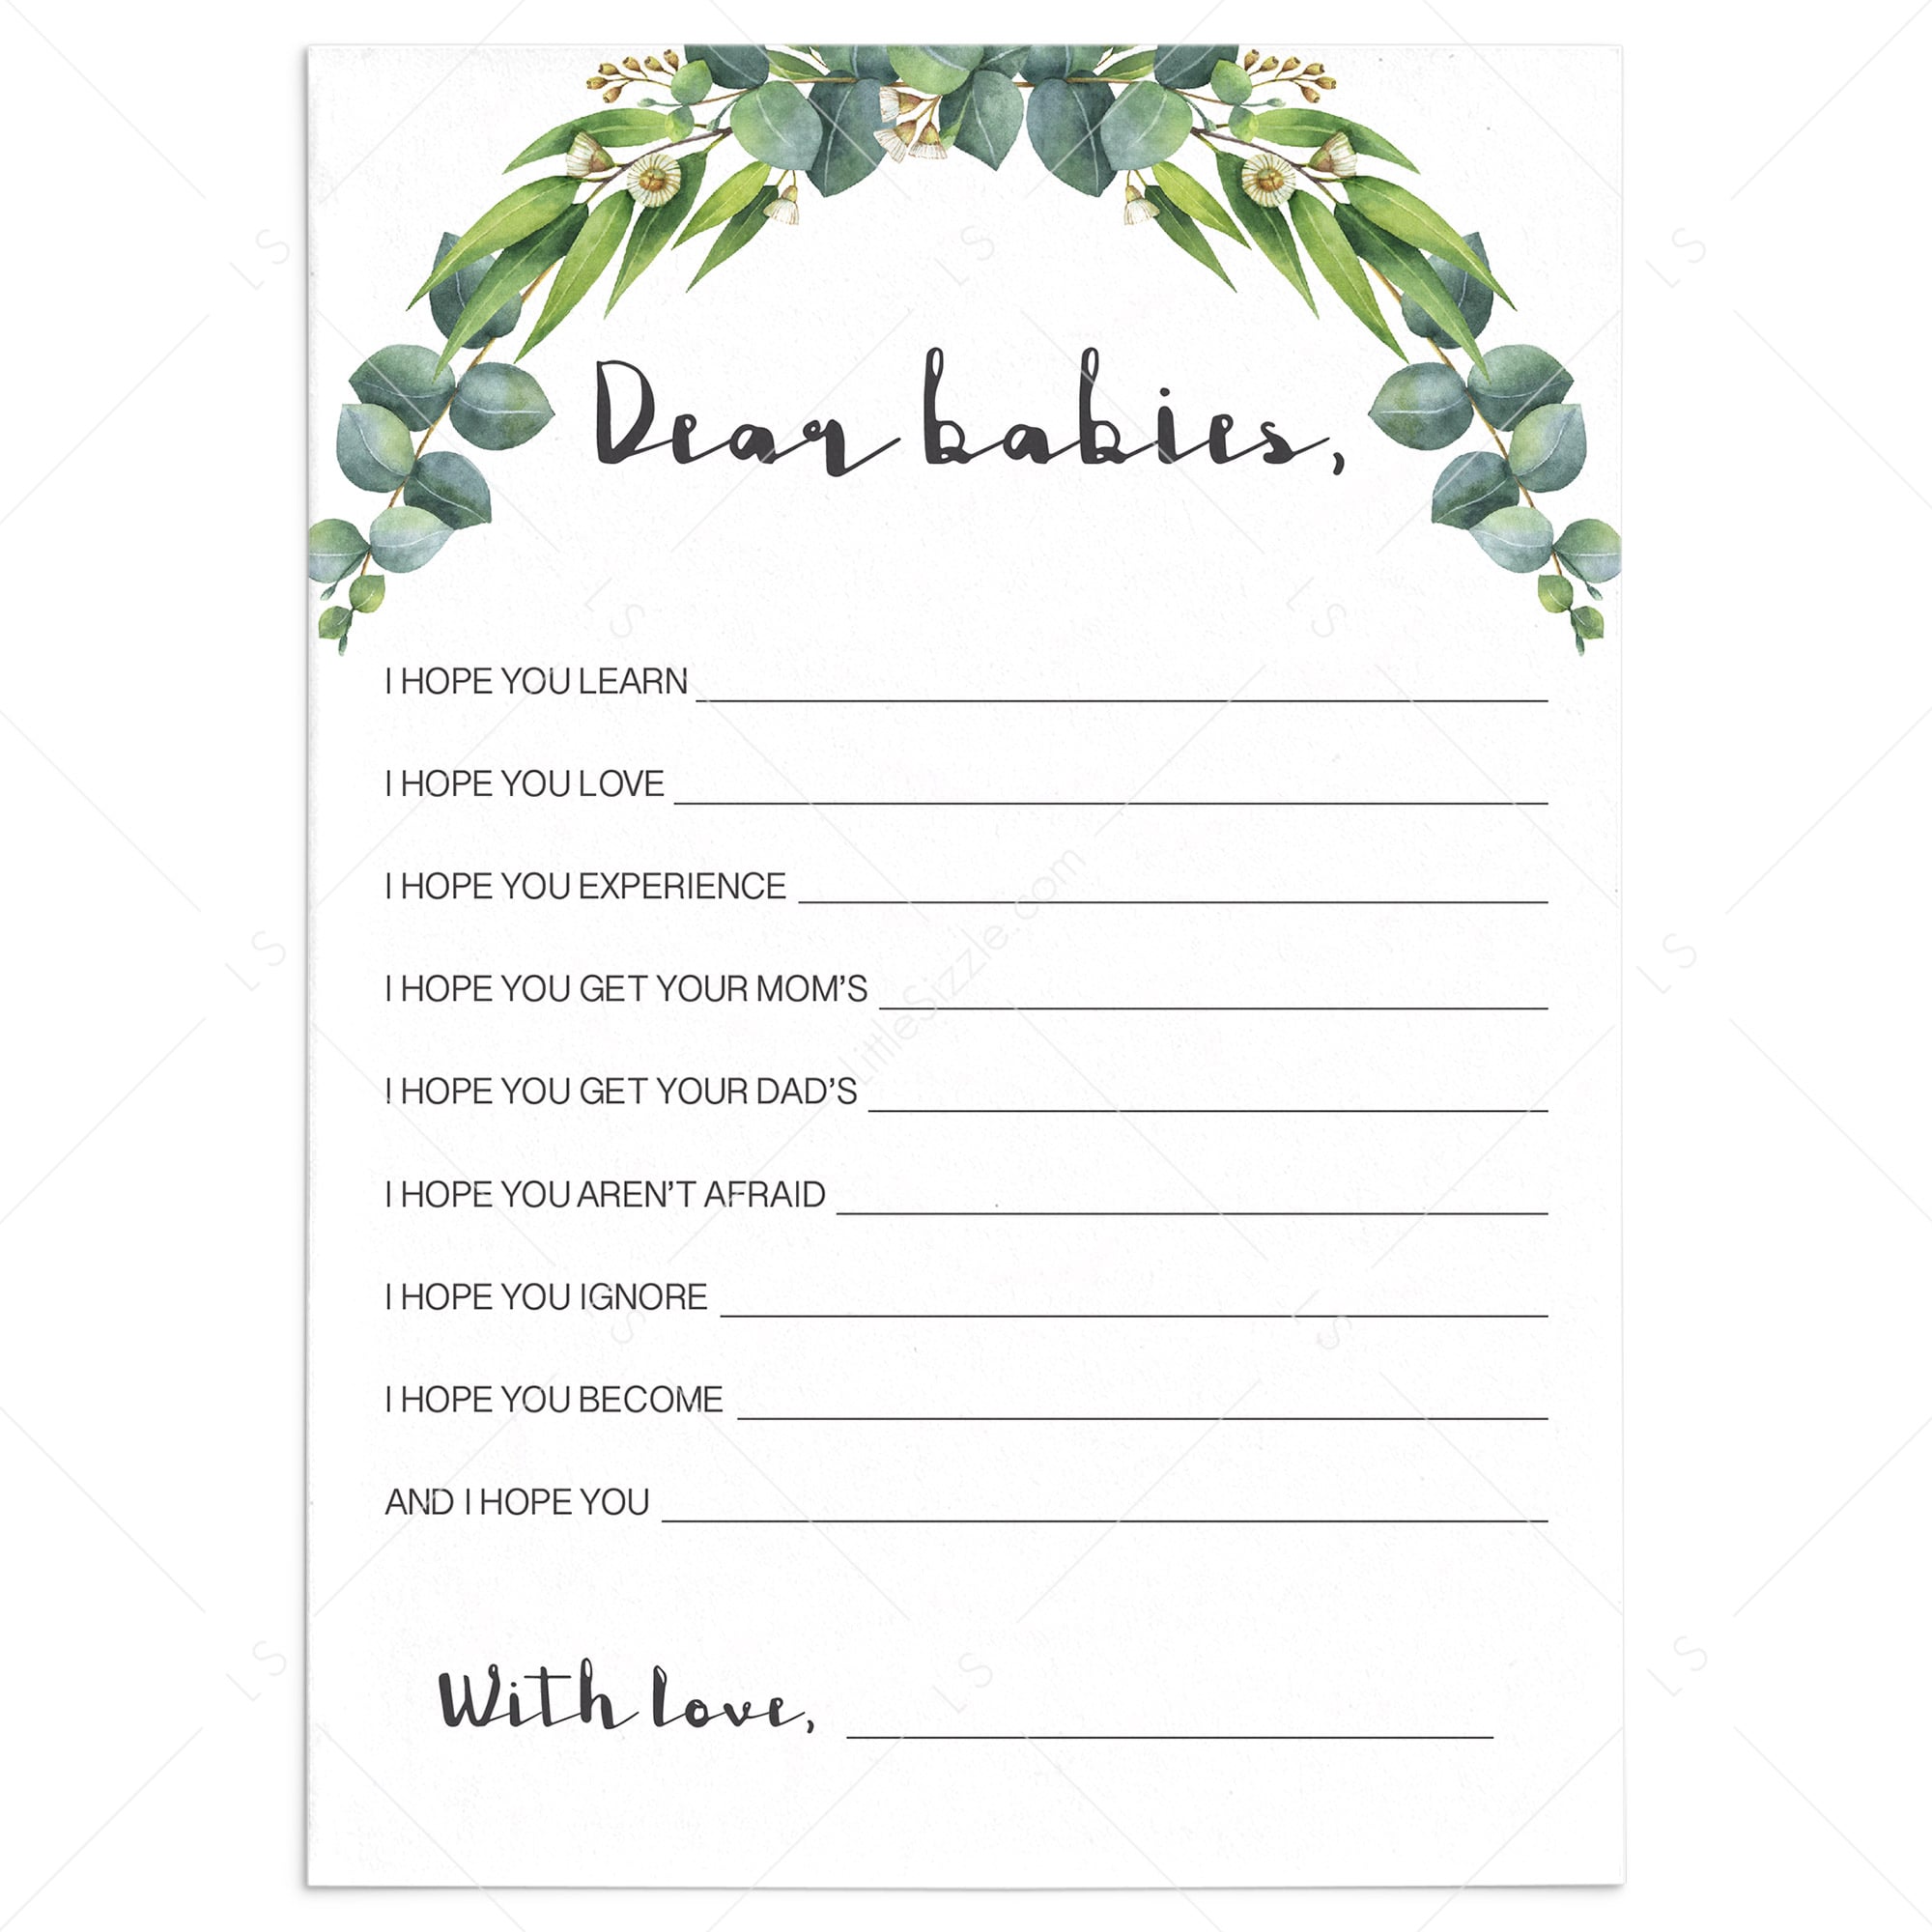 Wishes Twin Babies baby shower game printable | download LittleSizzle